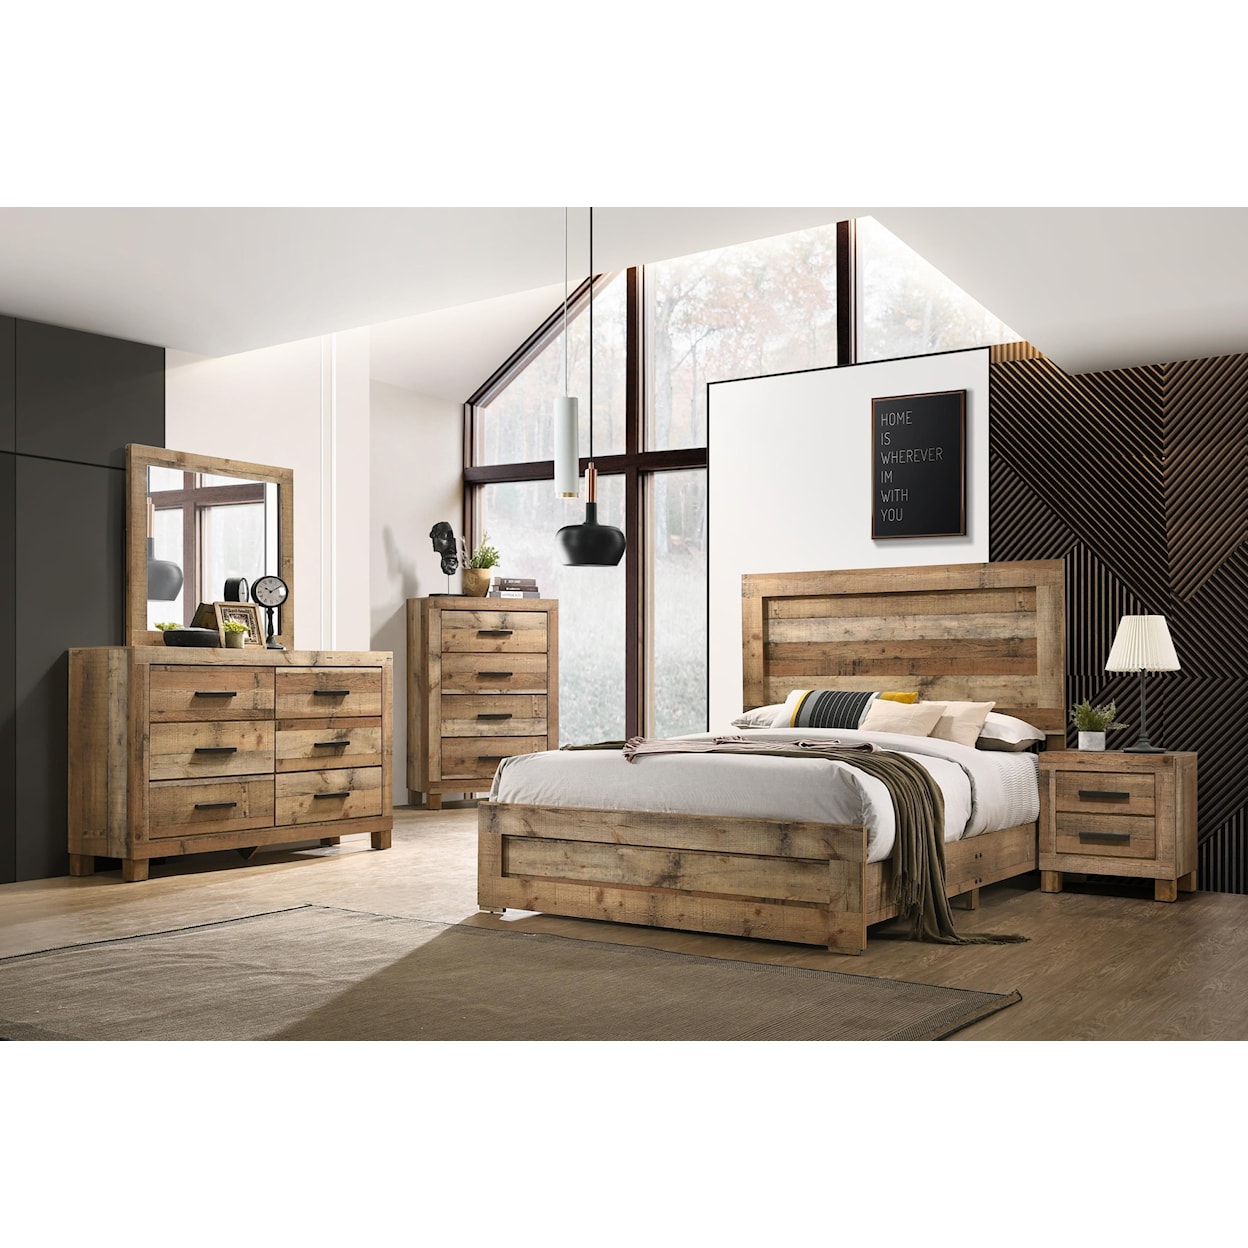 Lifestyle C8311A 5 Piece Queen Bedroom Group